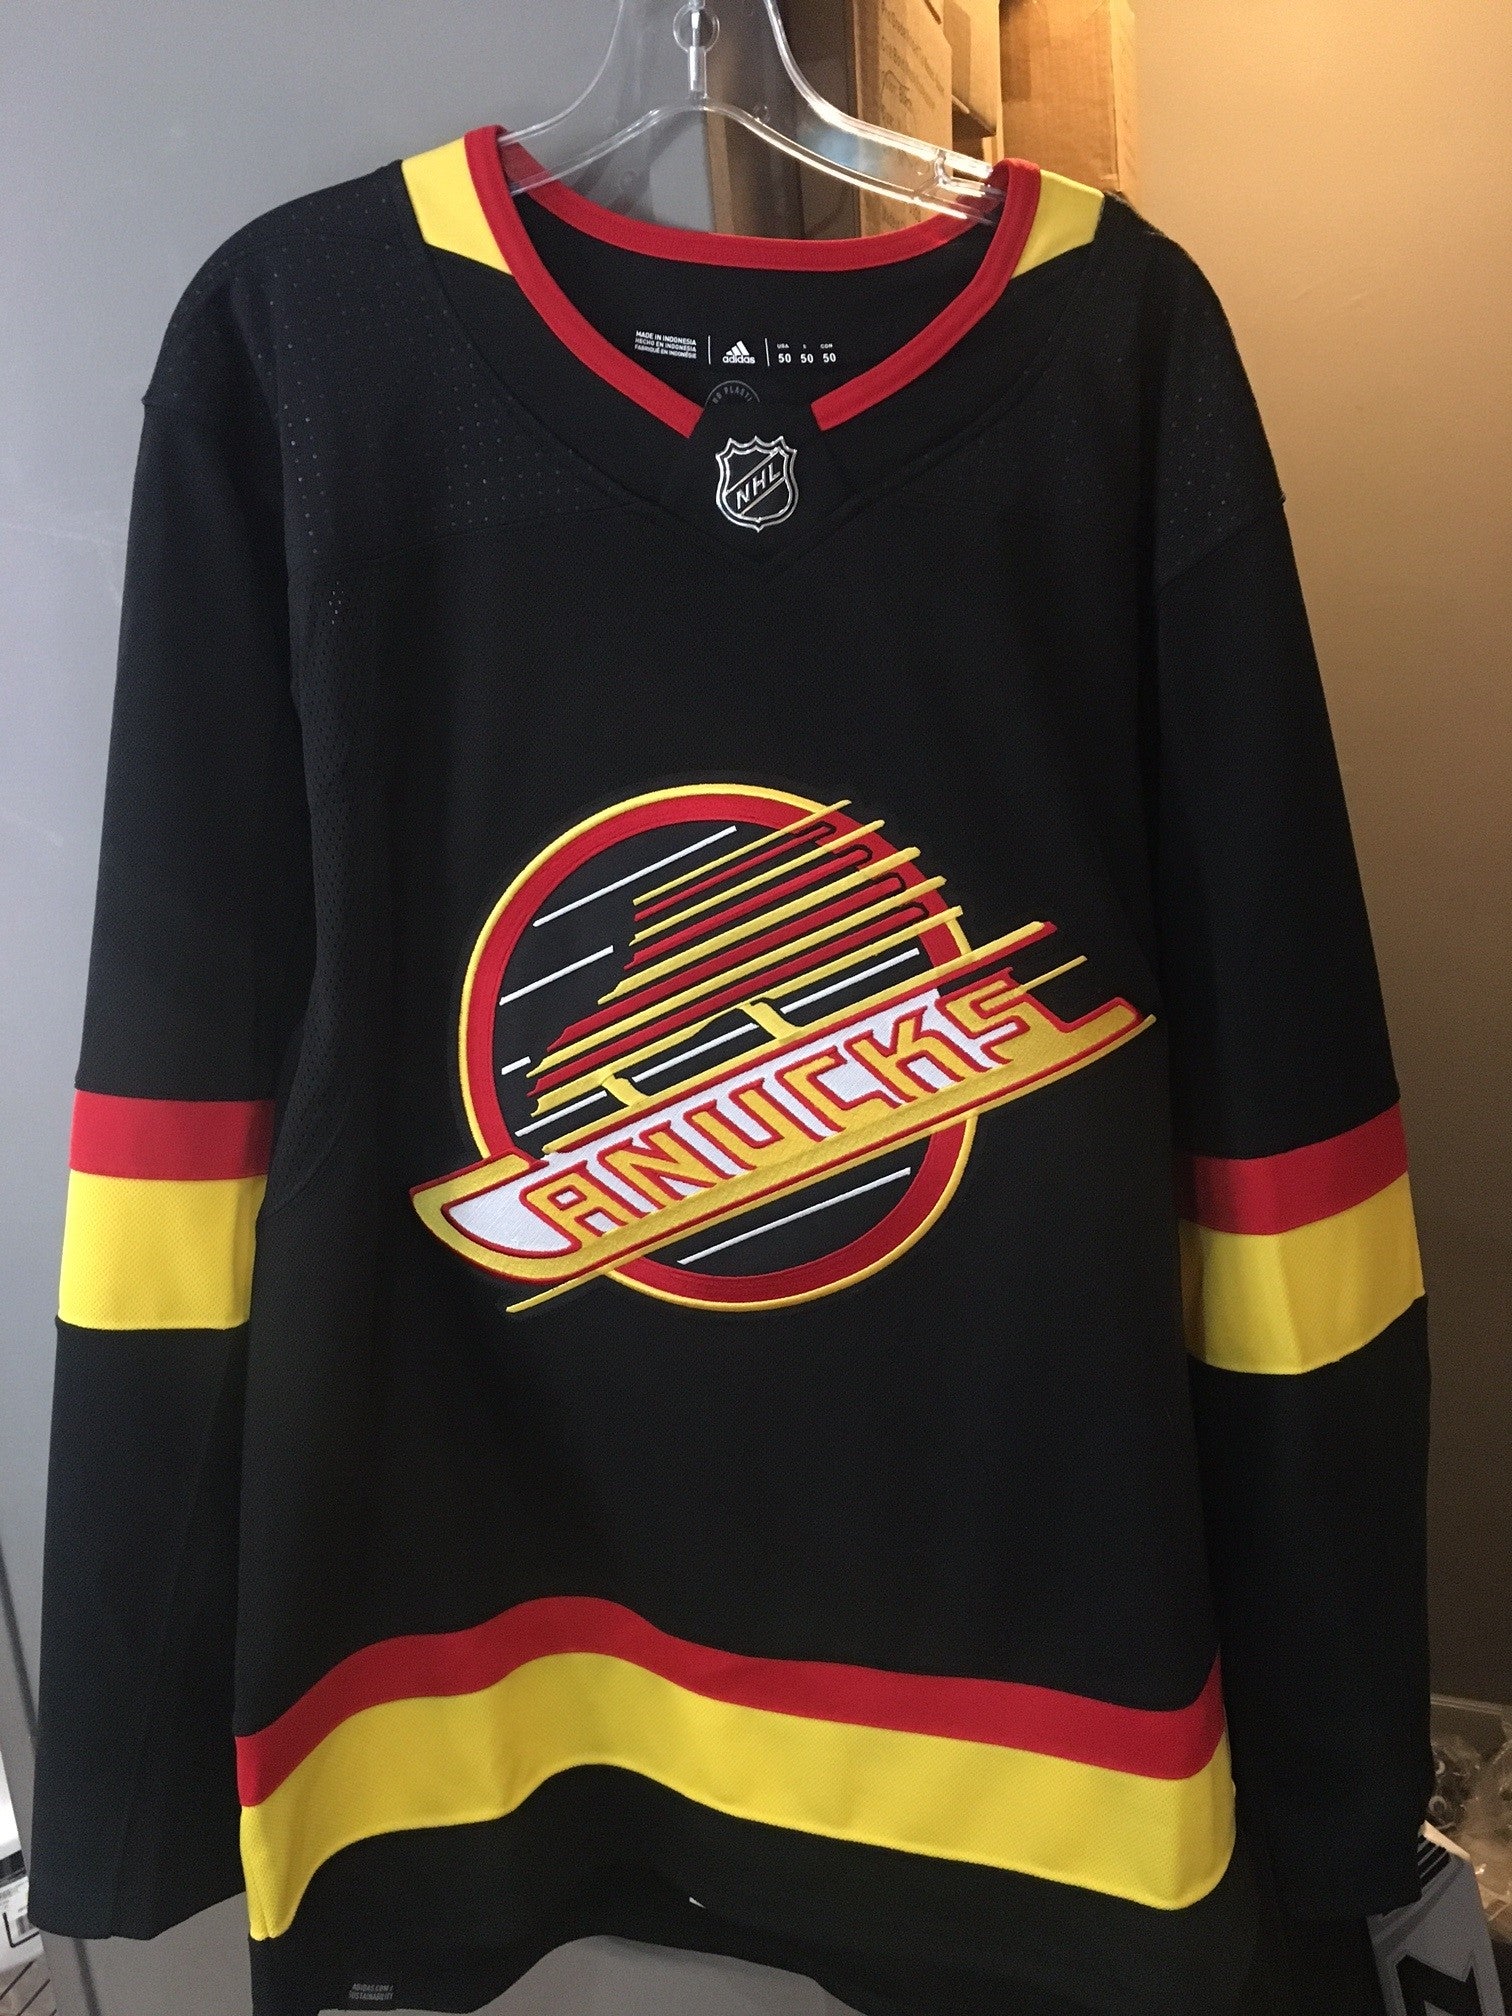 Vancouver Canucks Authentic Adidas Black Skate Jersey – Max